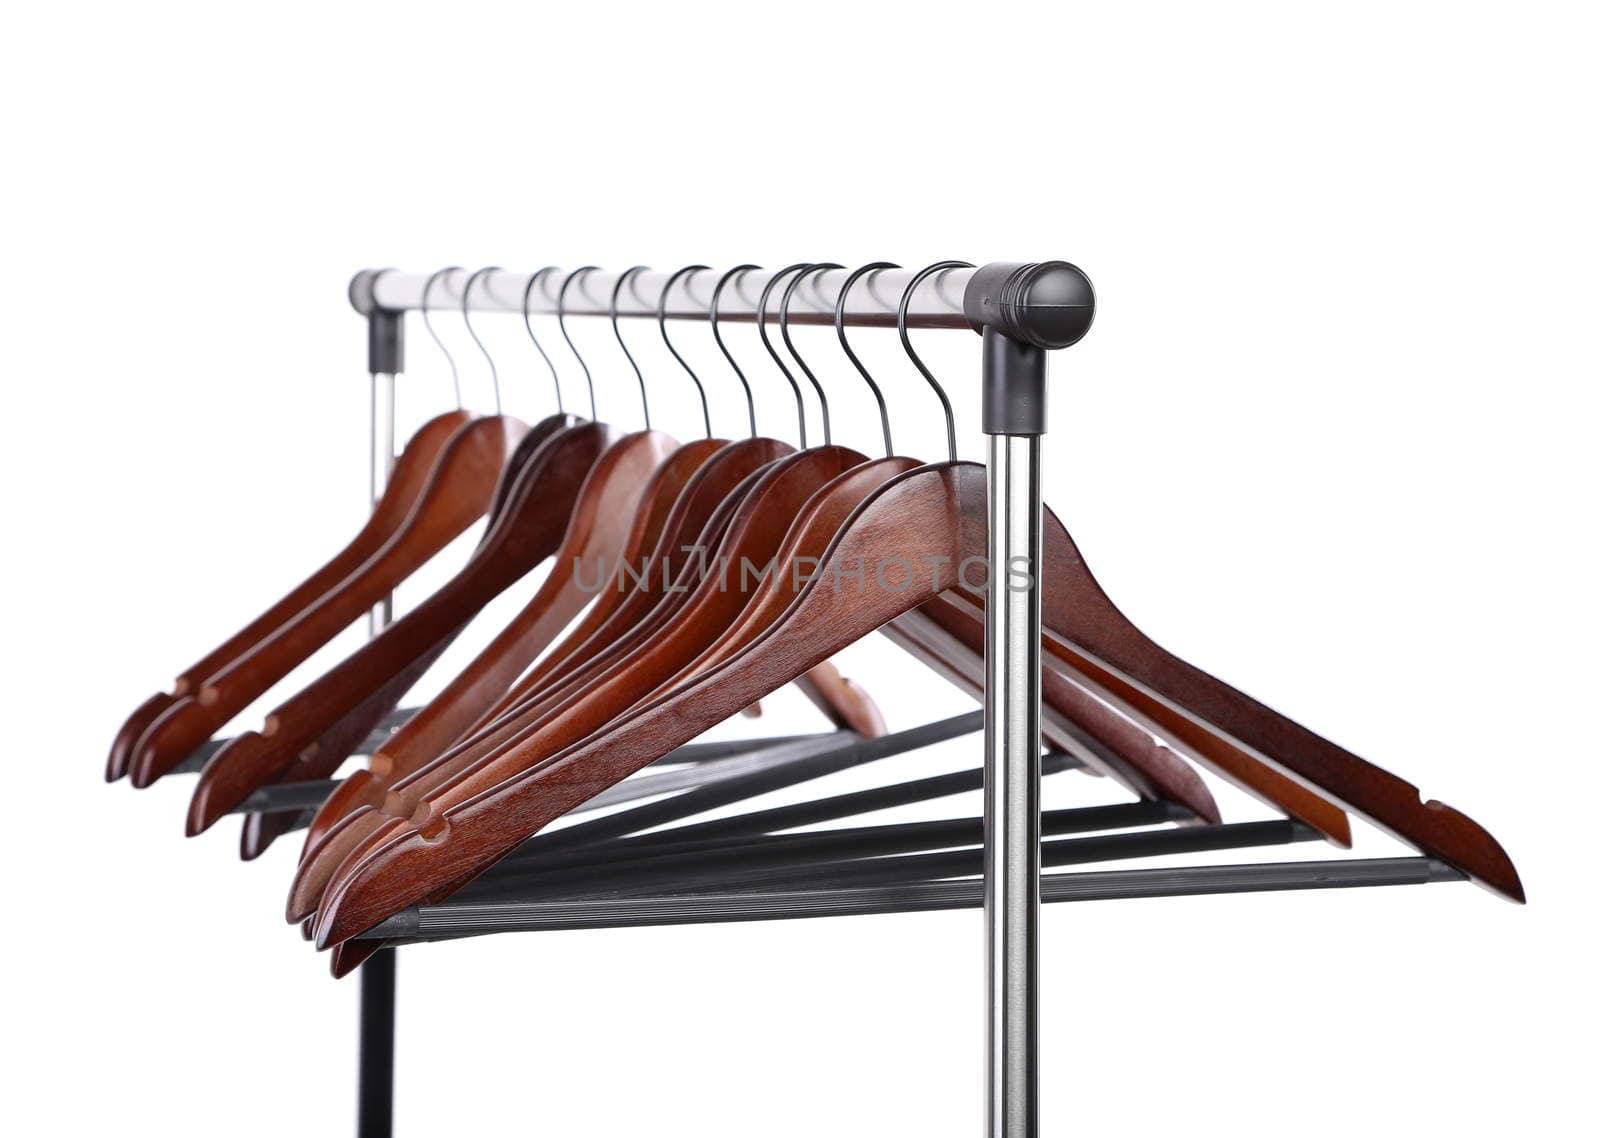 Many wooden hangers on a rod, isolated on white background